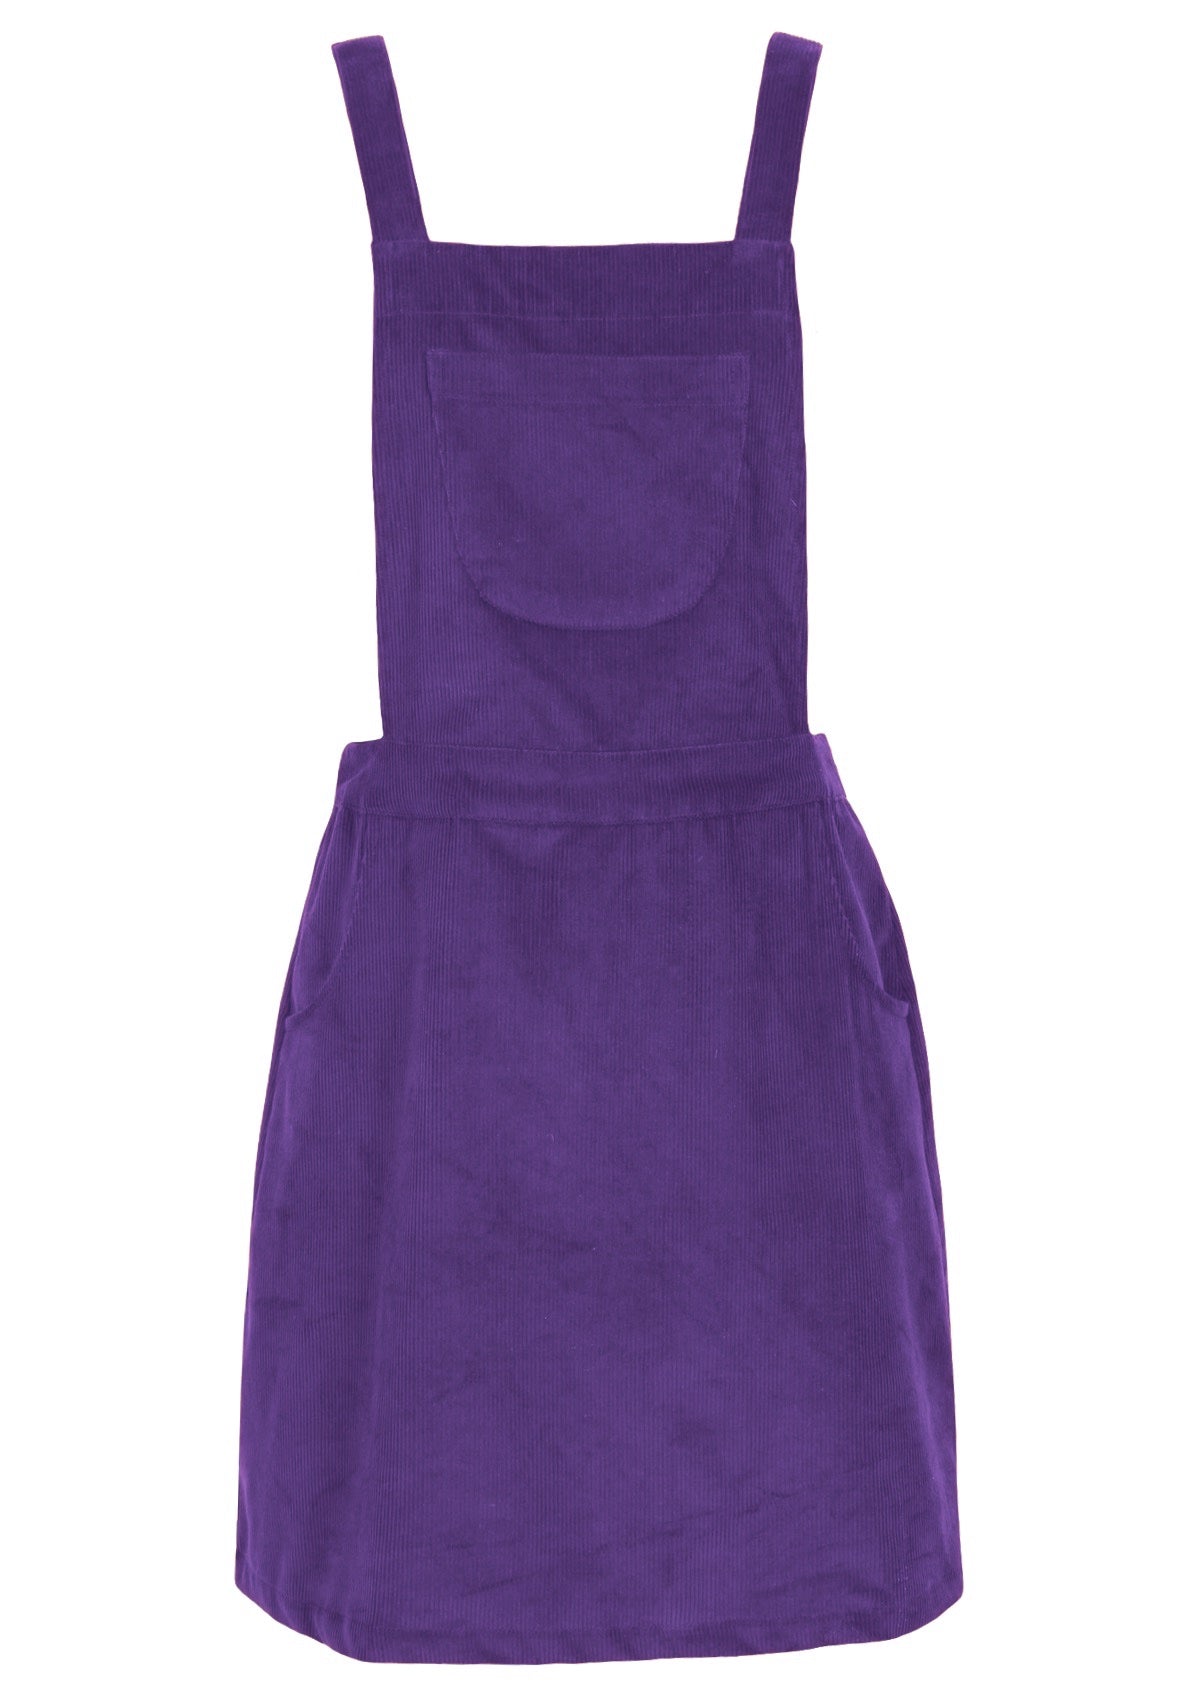 100% cotton corduroy pinafore in purple is above knee length. 